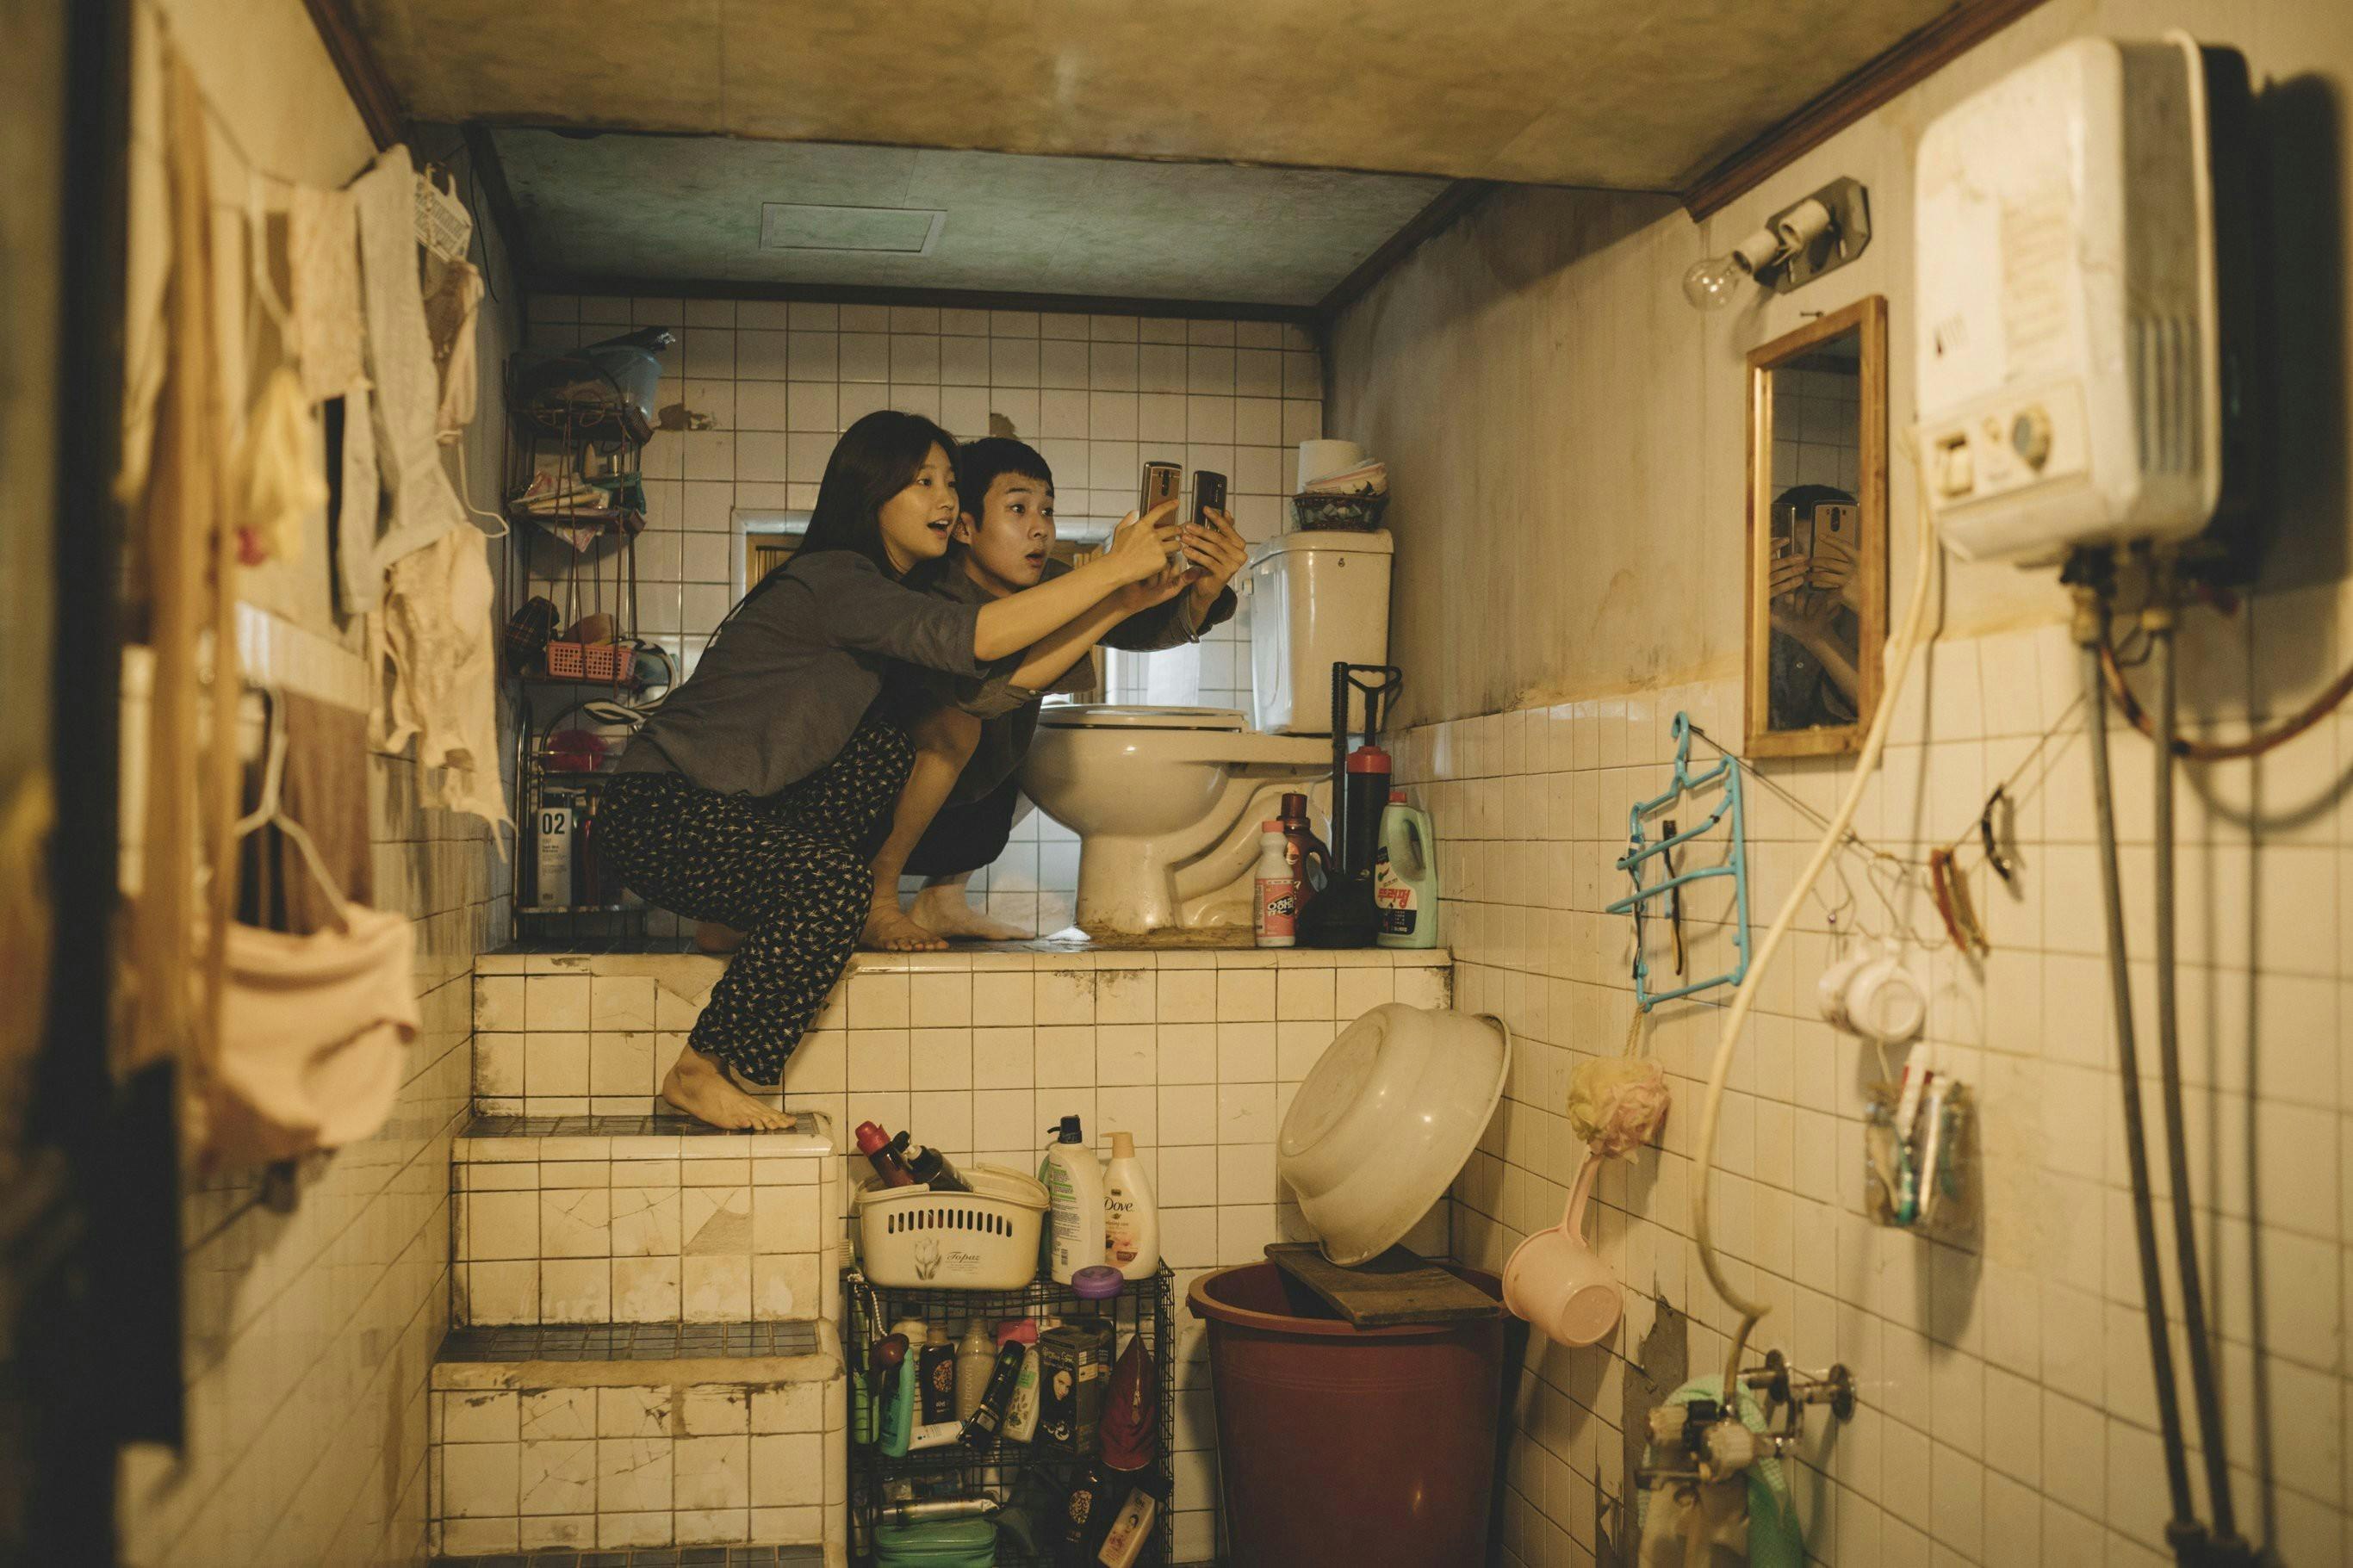 Actors Park So-dam and Choi Woo-sik in a still from 'Parasite': they are taking selfies, perched on steps beside a toilet in a dishevelled, tiled bathroom.